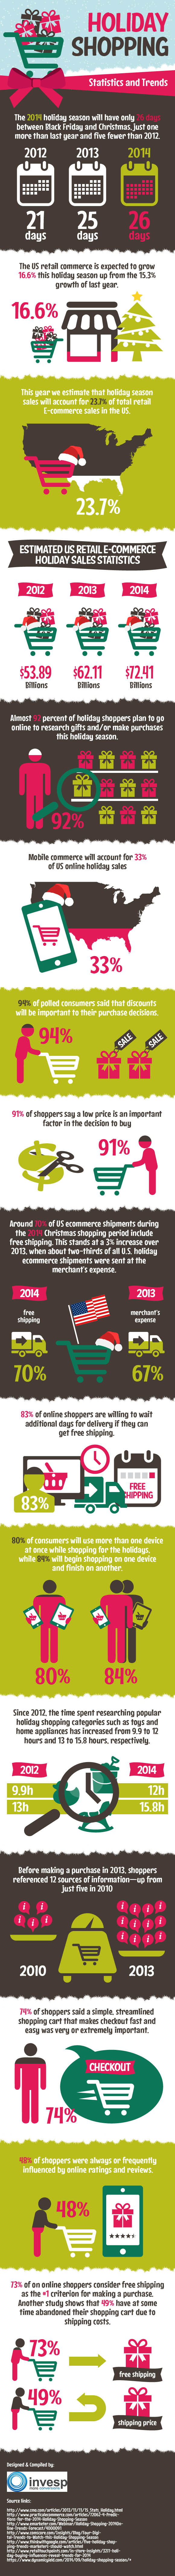 Holiday Shopping Statistics and Trends